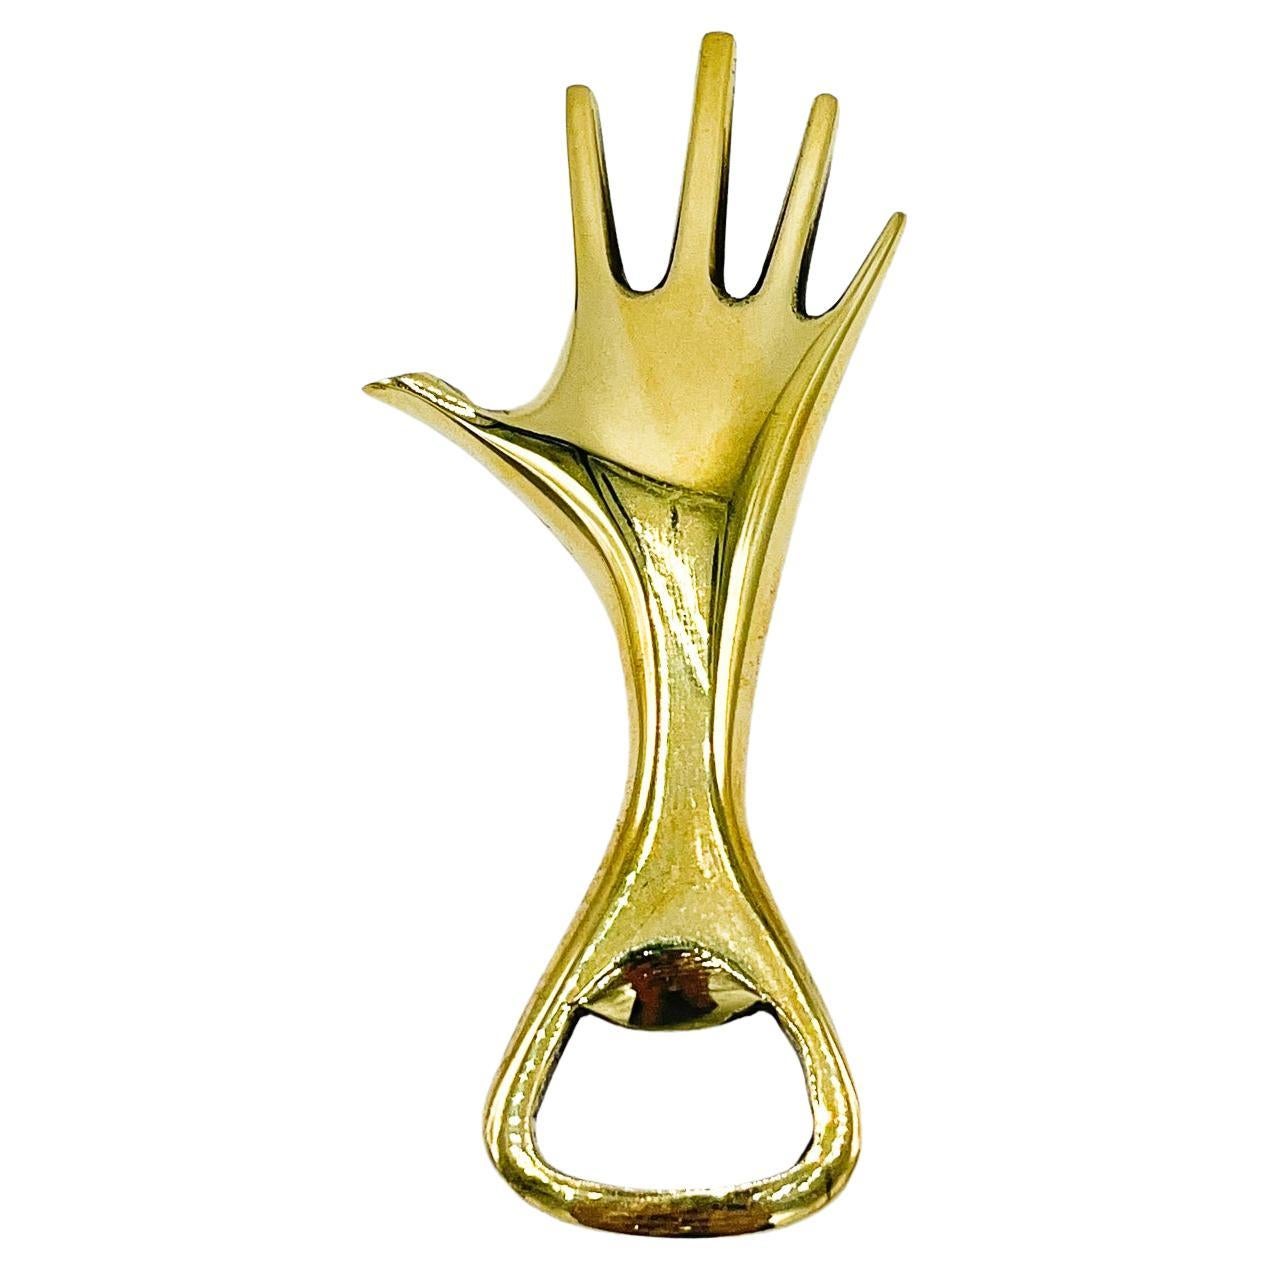 Carl Aubock polished brass hand bottle opener #4224. This whimsical 1950's hand bottle opener by Carl Aubock is a wonderful example of the marriage of form and functionality that has made the Aubock name synonymous with great design. Aubock items